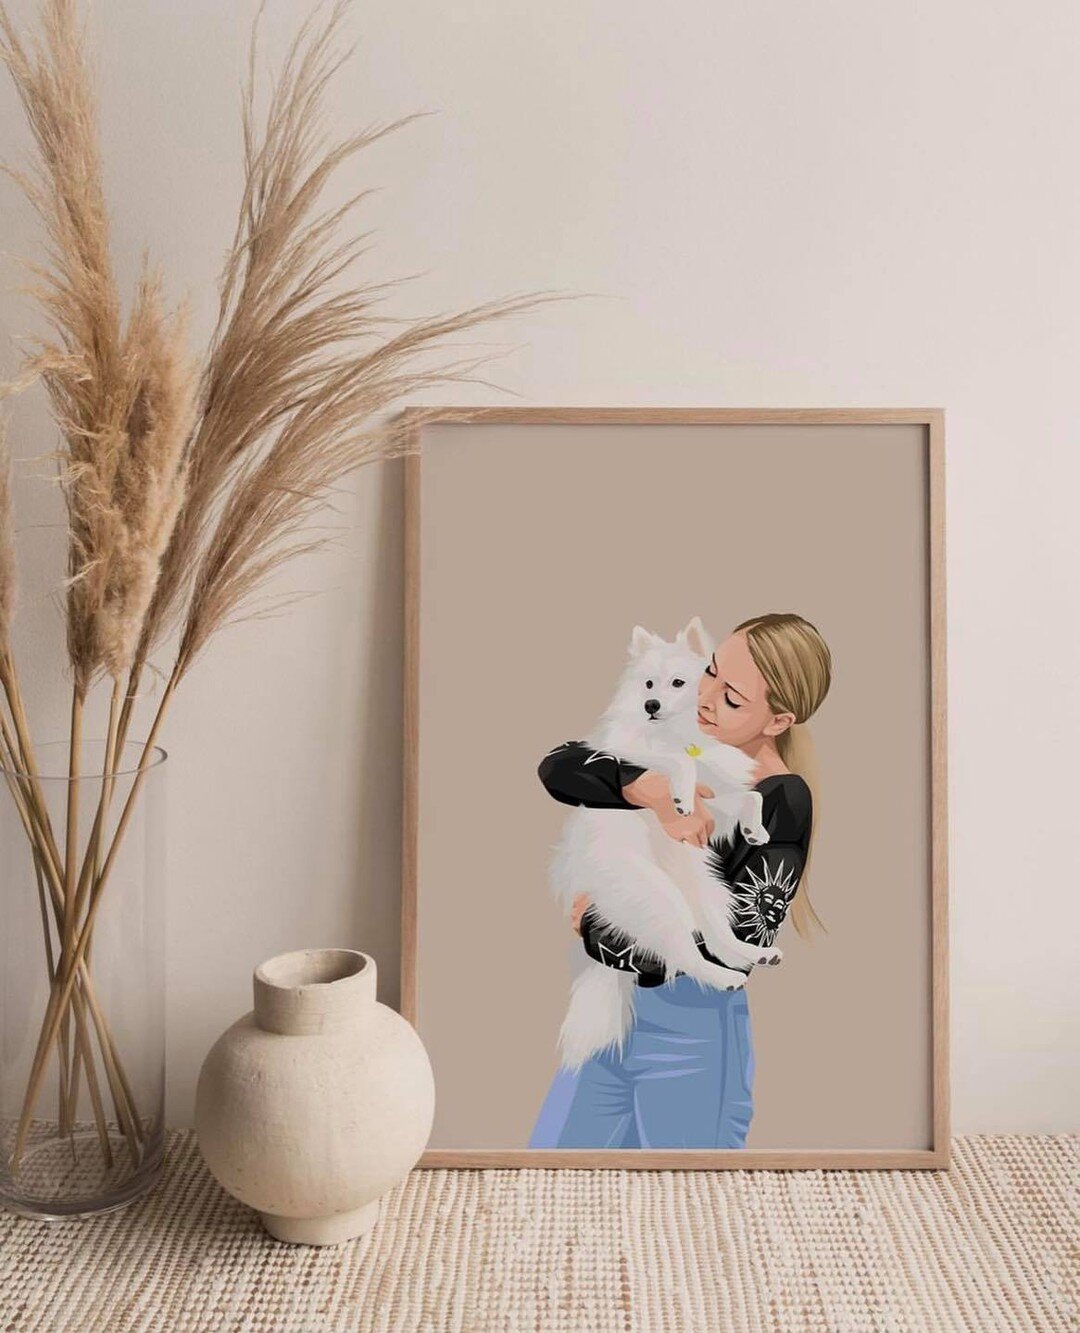 The best kind of artwork for your wall 💗🐶 Custom Mum and fur baby portrait! 💗